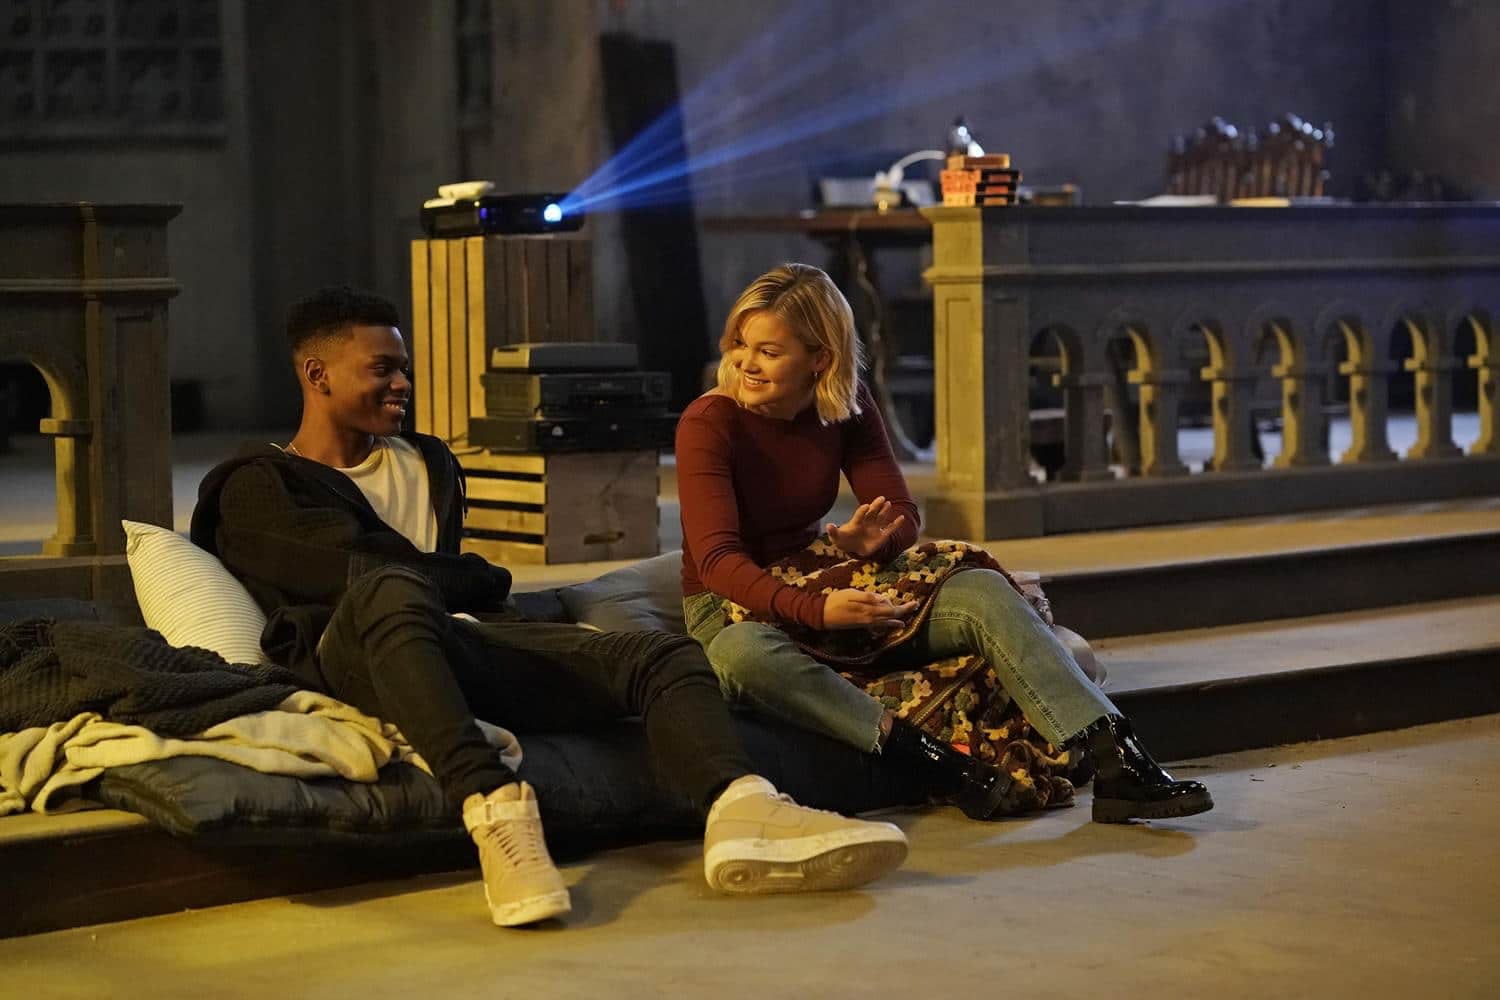 Cloak and Dagger Season 2: Some Story Details and 4 New Images